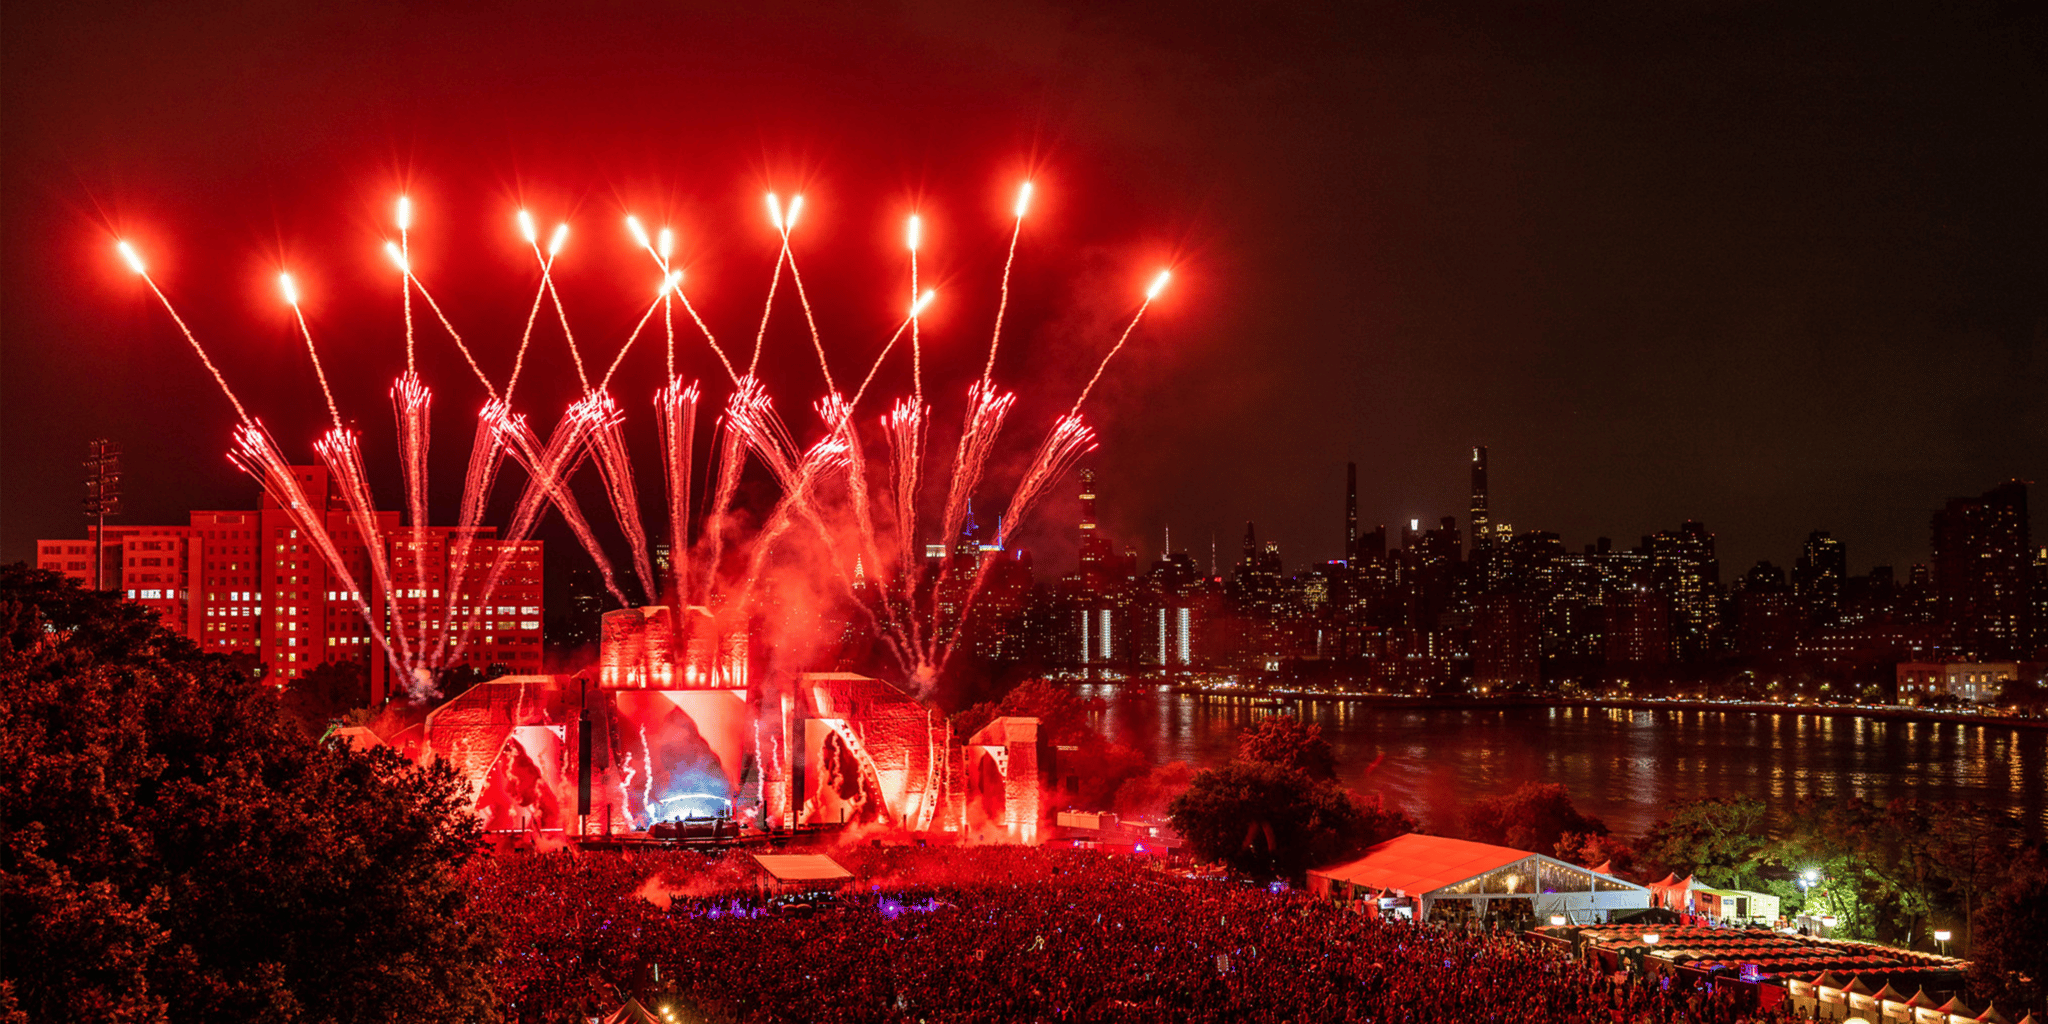 ELECTRIC ZOO 3.0: NYC PREMIER ELECTRONIC MUSIC FESTIVAL DRAWS 100000 FANS